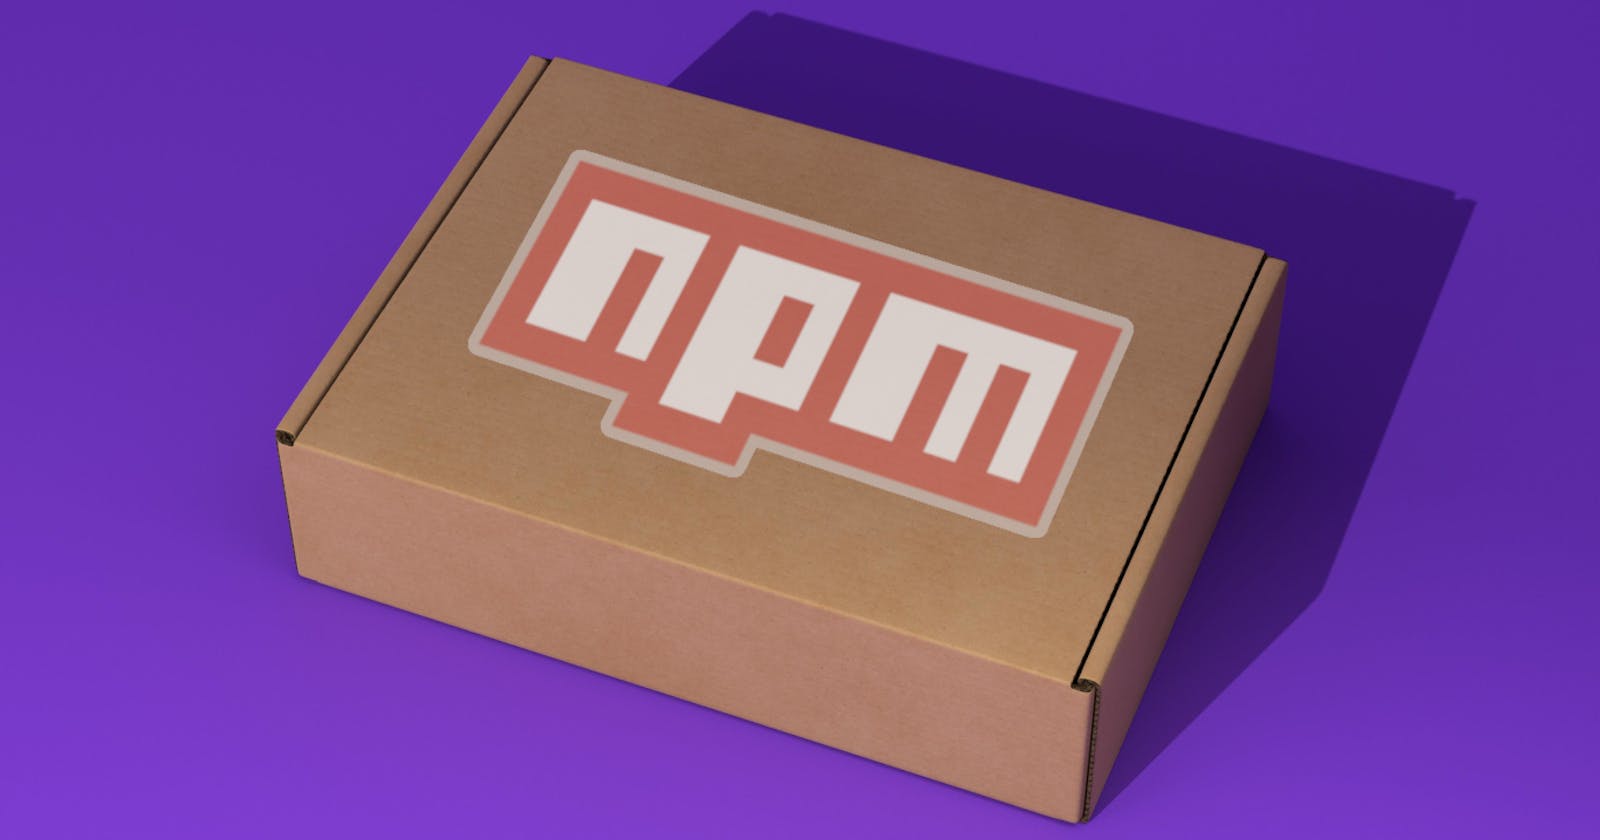 How to setup an NPM package